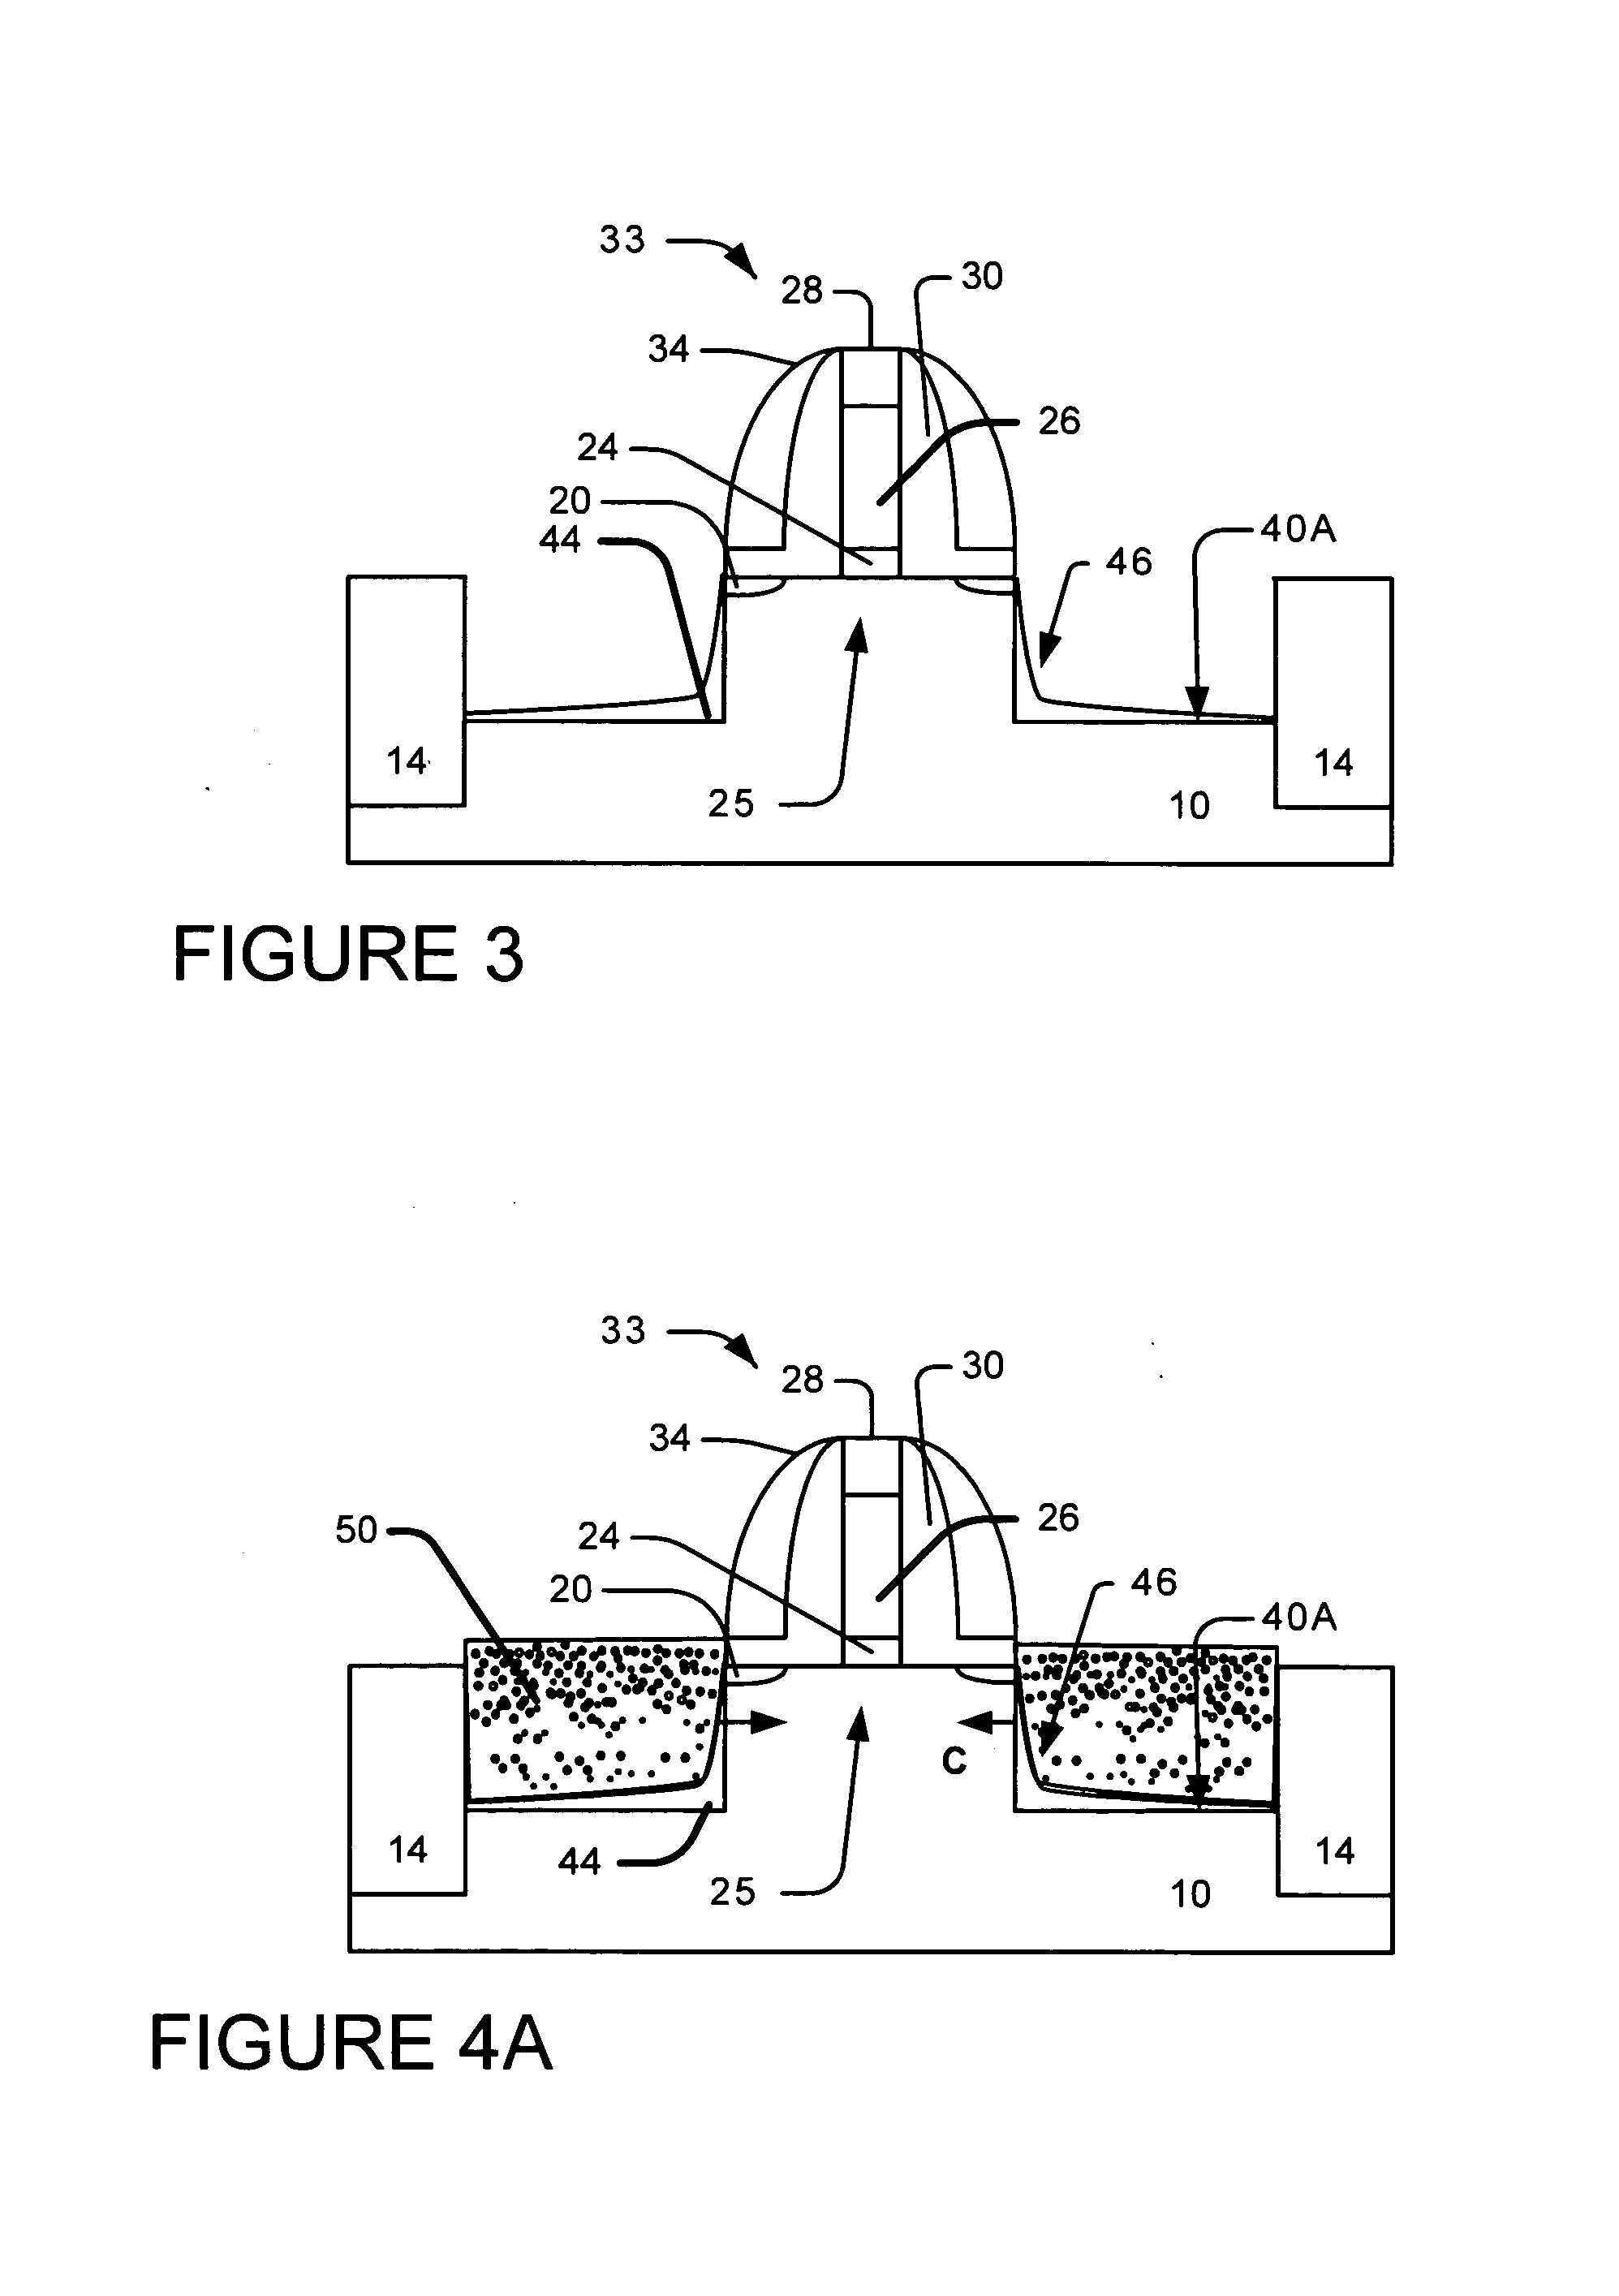 Method to control source/drain stressor profiles for stress engineering